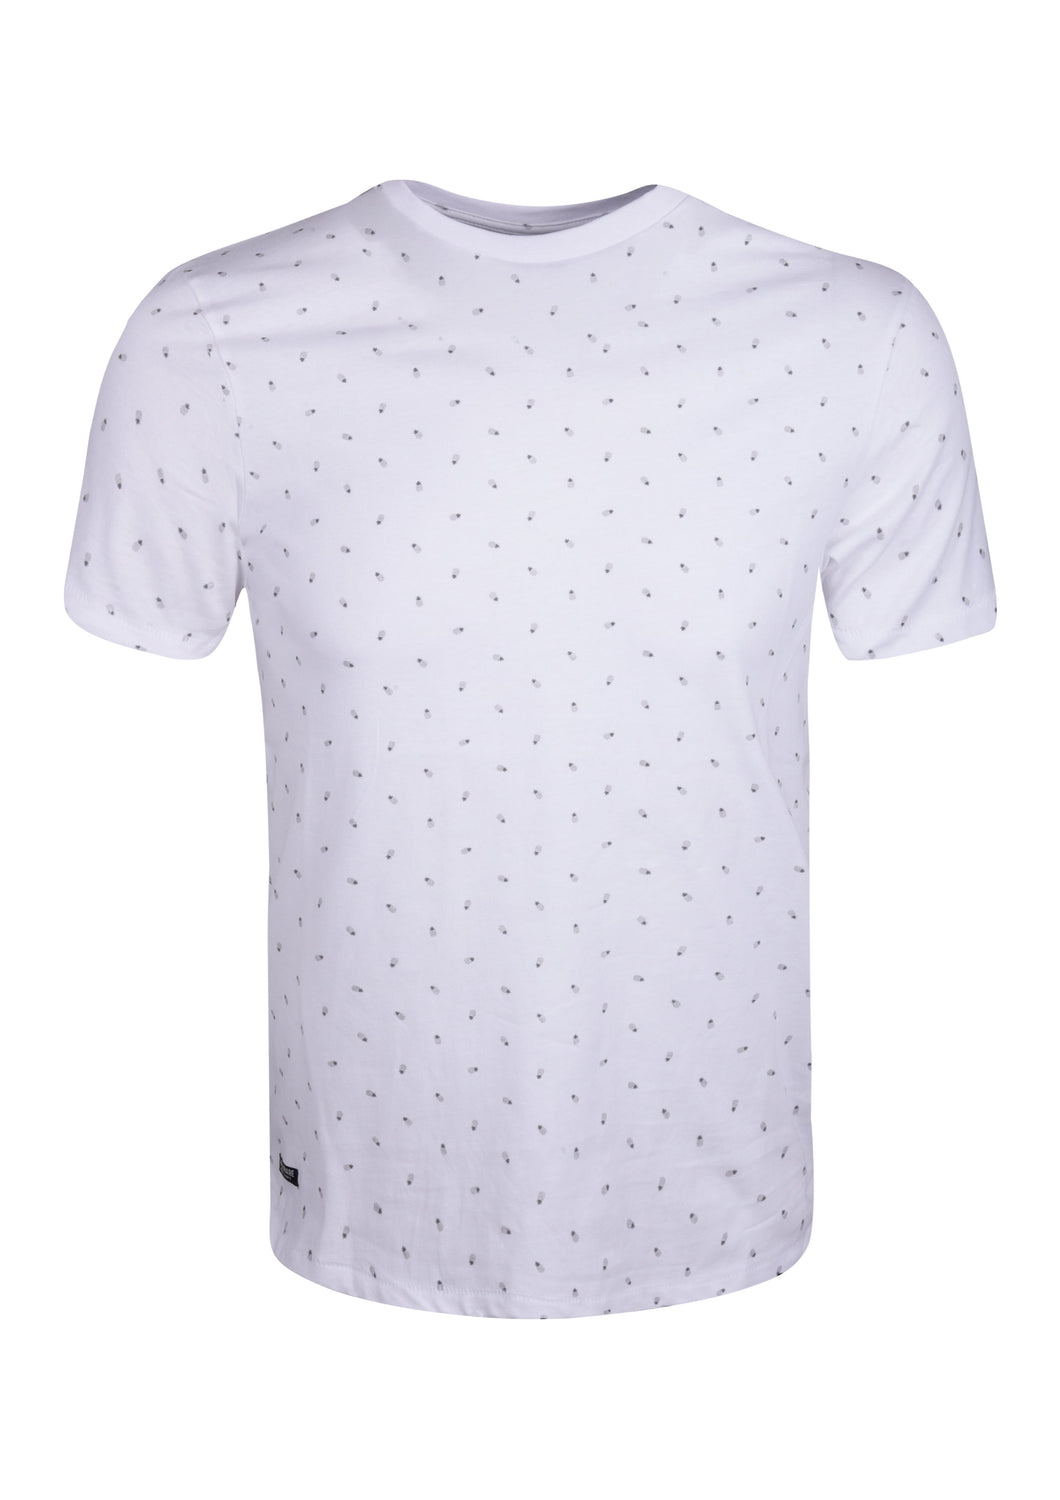 CREW NECK T SHIRT WITH PINEAPPLE PRINT - WHITE